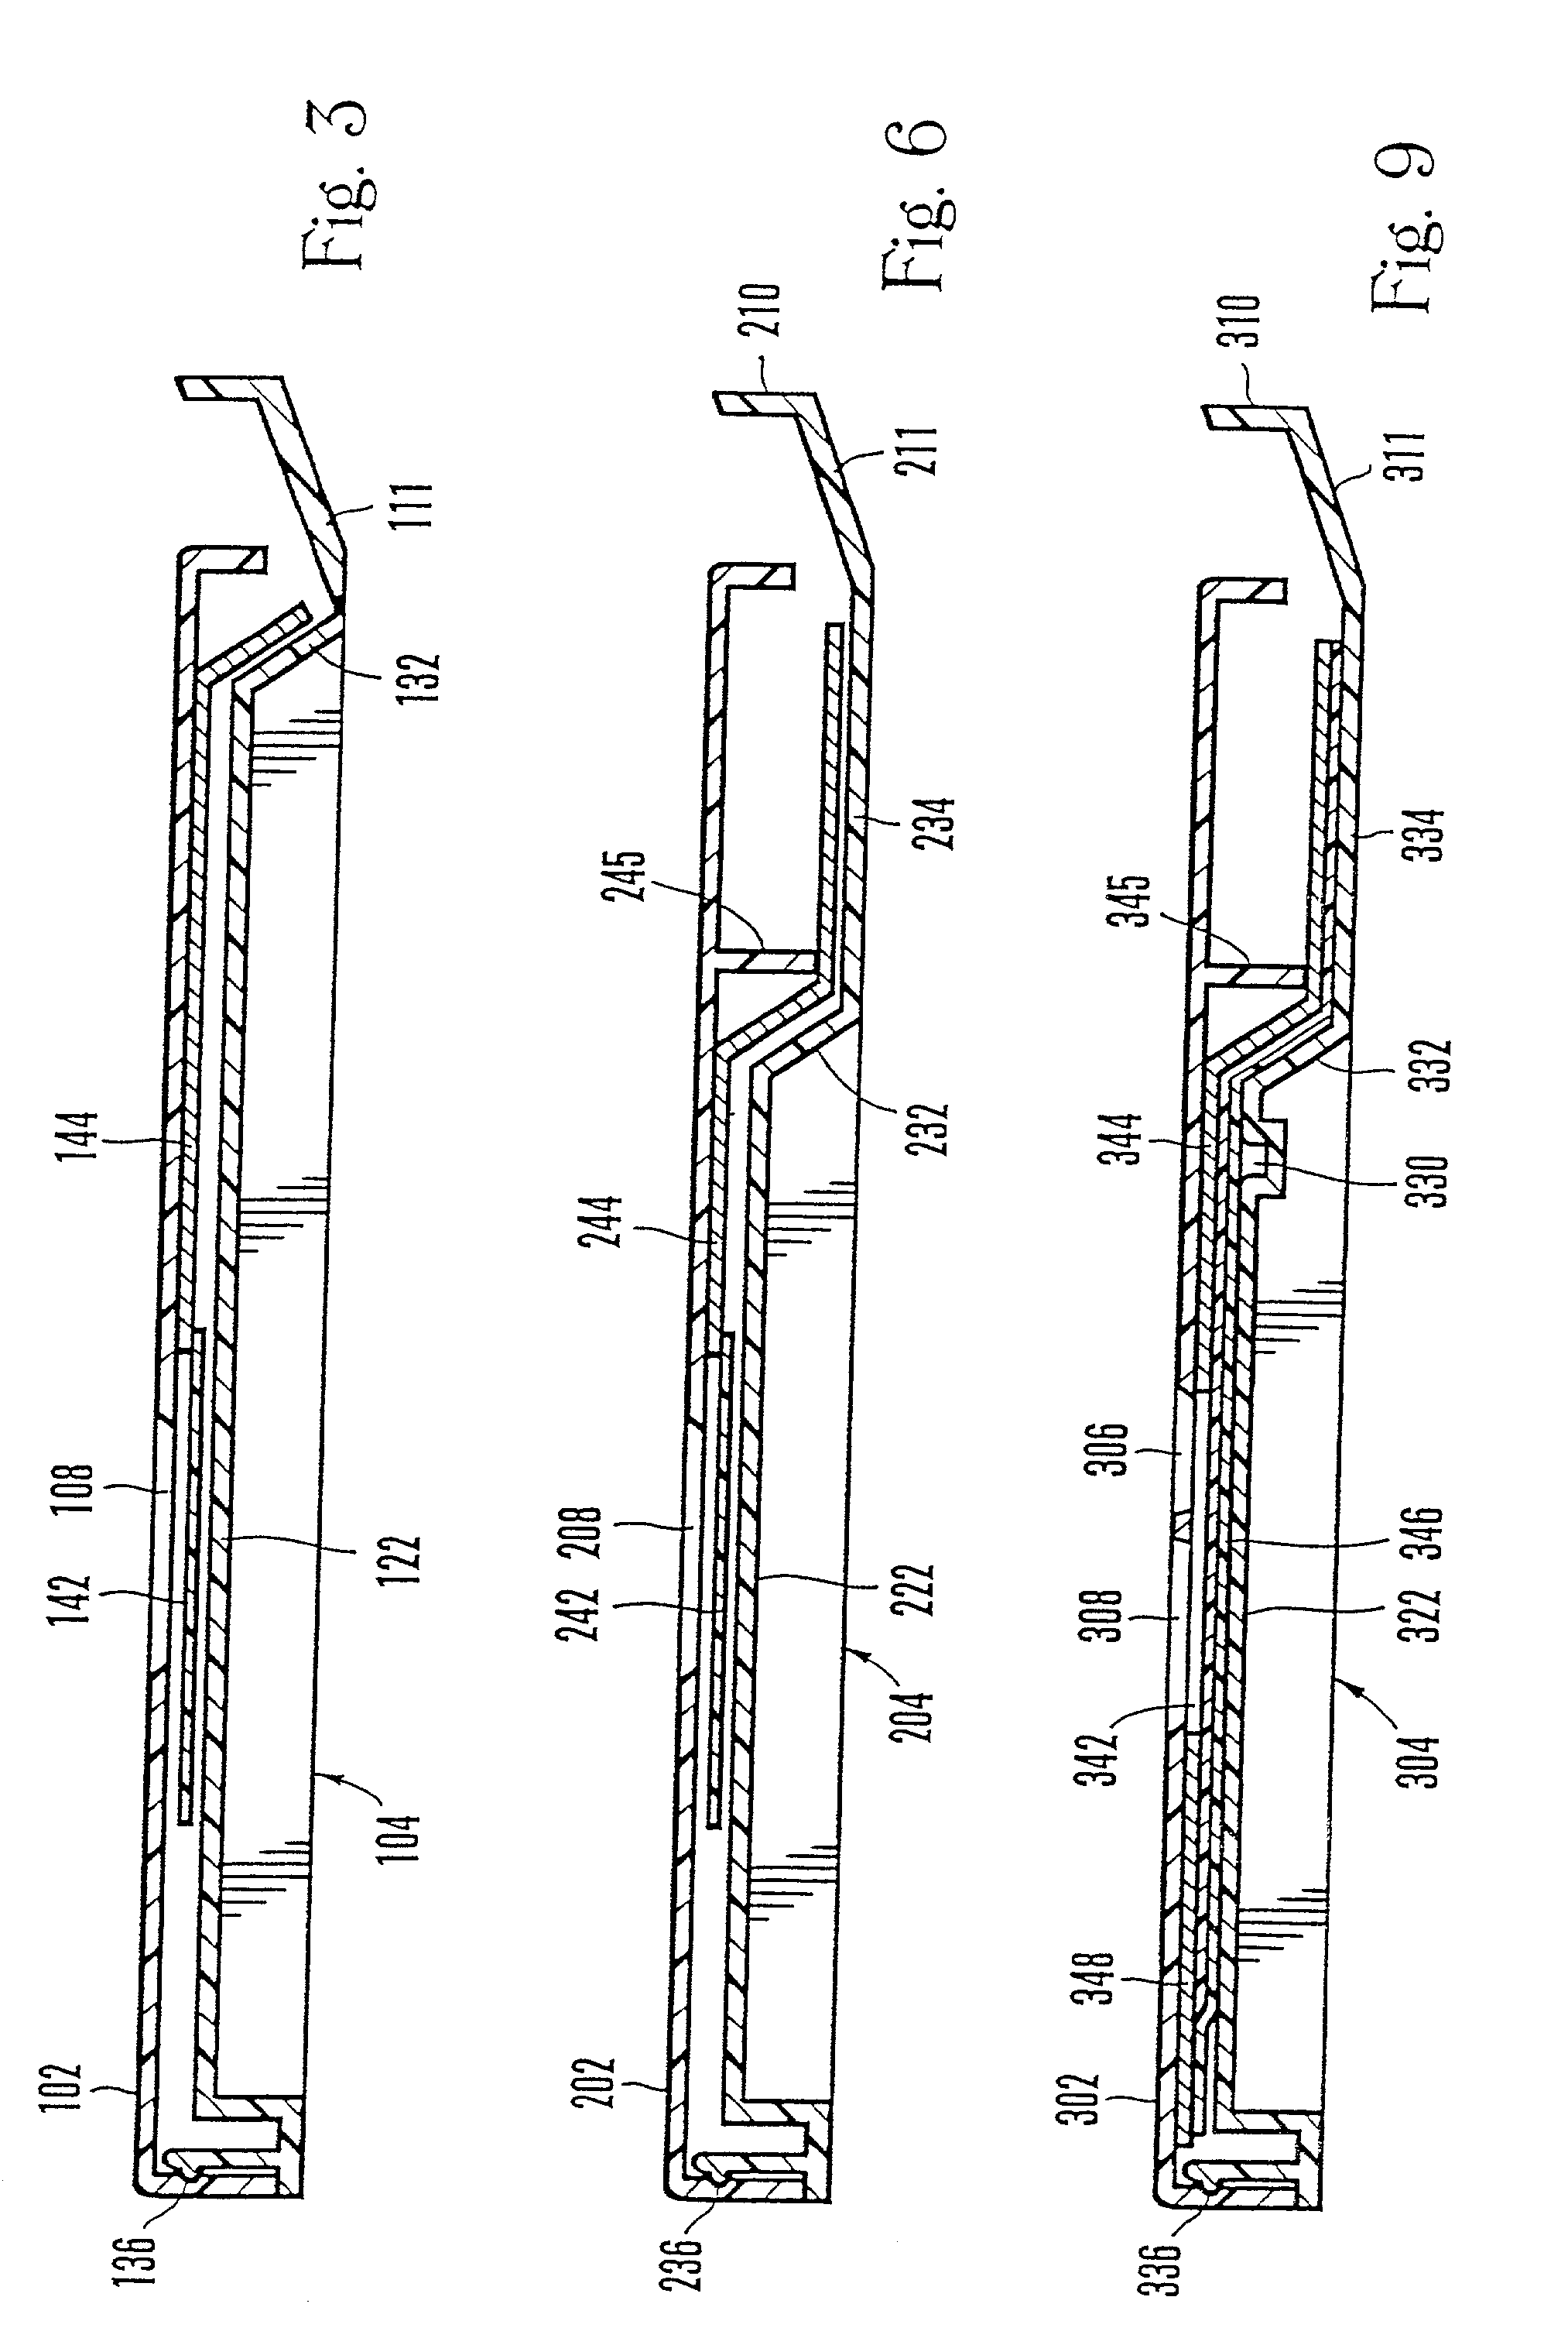 Even fluid front for liquid sample on test strip device